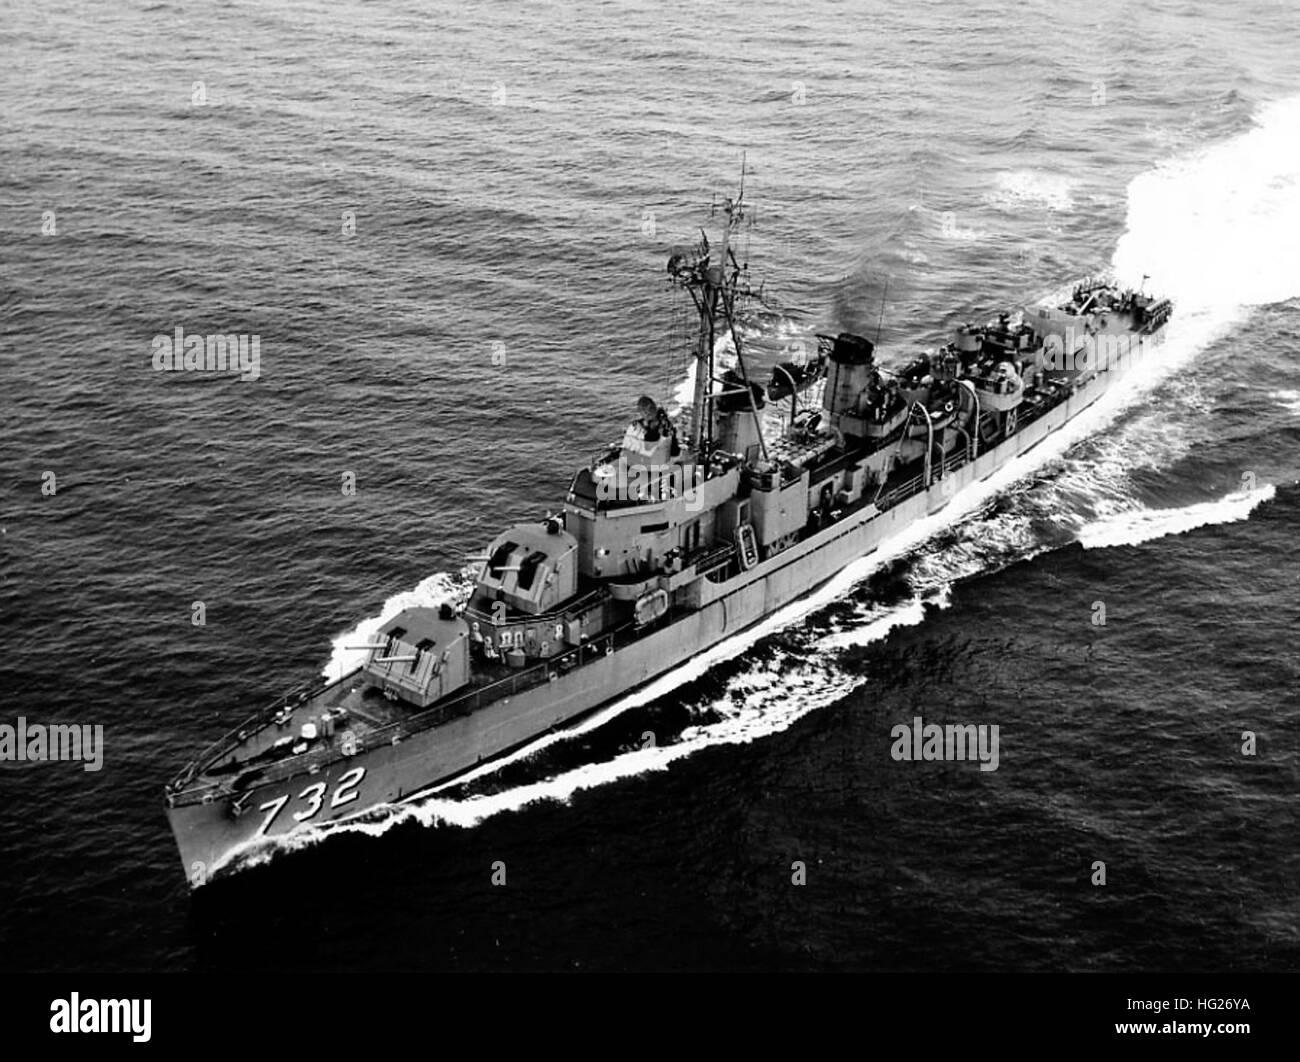 USS Hyman (DD-732) underway during the early or middle 1950s. This photograph was received by the Naval Photographic Center in December 1959, but was taken several years earlier. Note that the ship still carries 40mm guns (replaced by 3/50s by mid-decade) and 20mm guns, but has a tripod foremast and SPS-6 radar (both typically fitted during the early '50s).  Official U.S. Navy Photograph, from the collections of the Naval History and Heritage Command. USS Hyman (DD-732) underway in the early 1950s Stock Photo